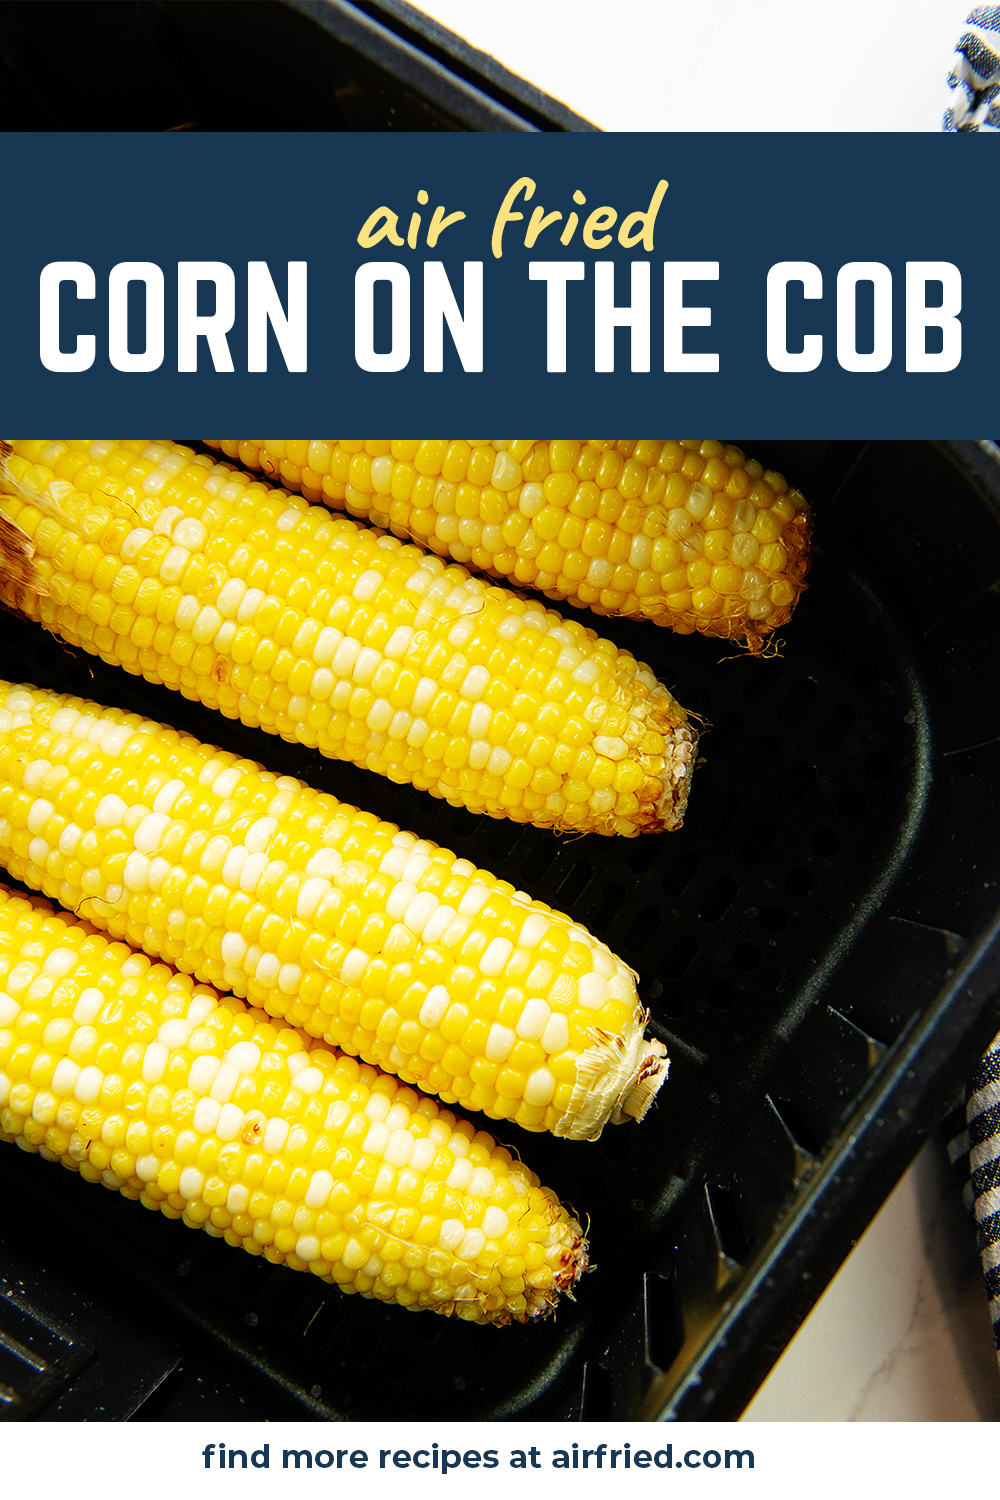 This corn on the cob recipe uses the air fryer to make the corn crisp and very easy to cook!